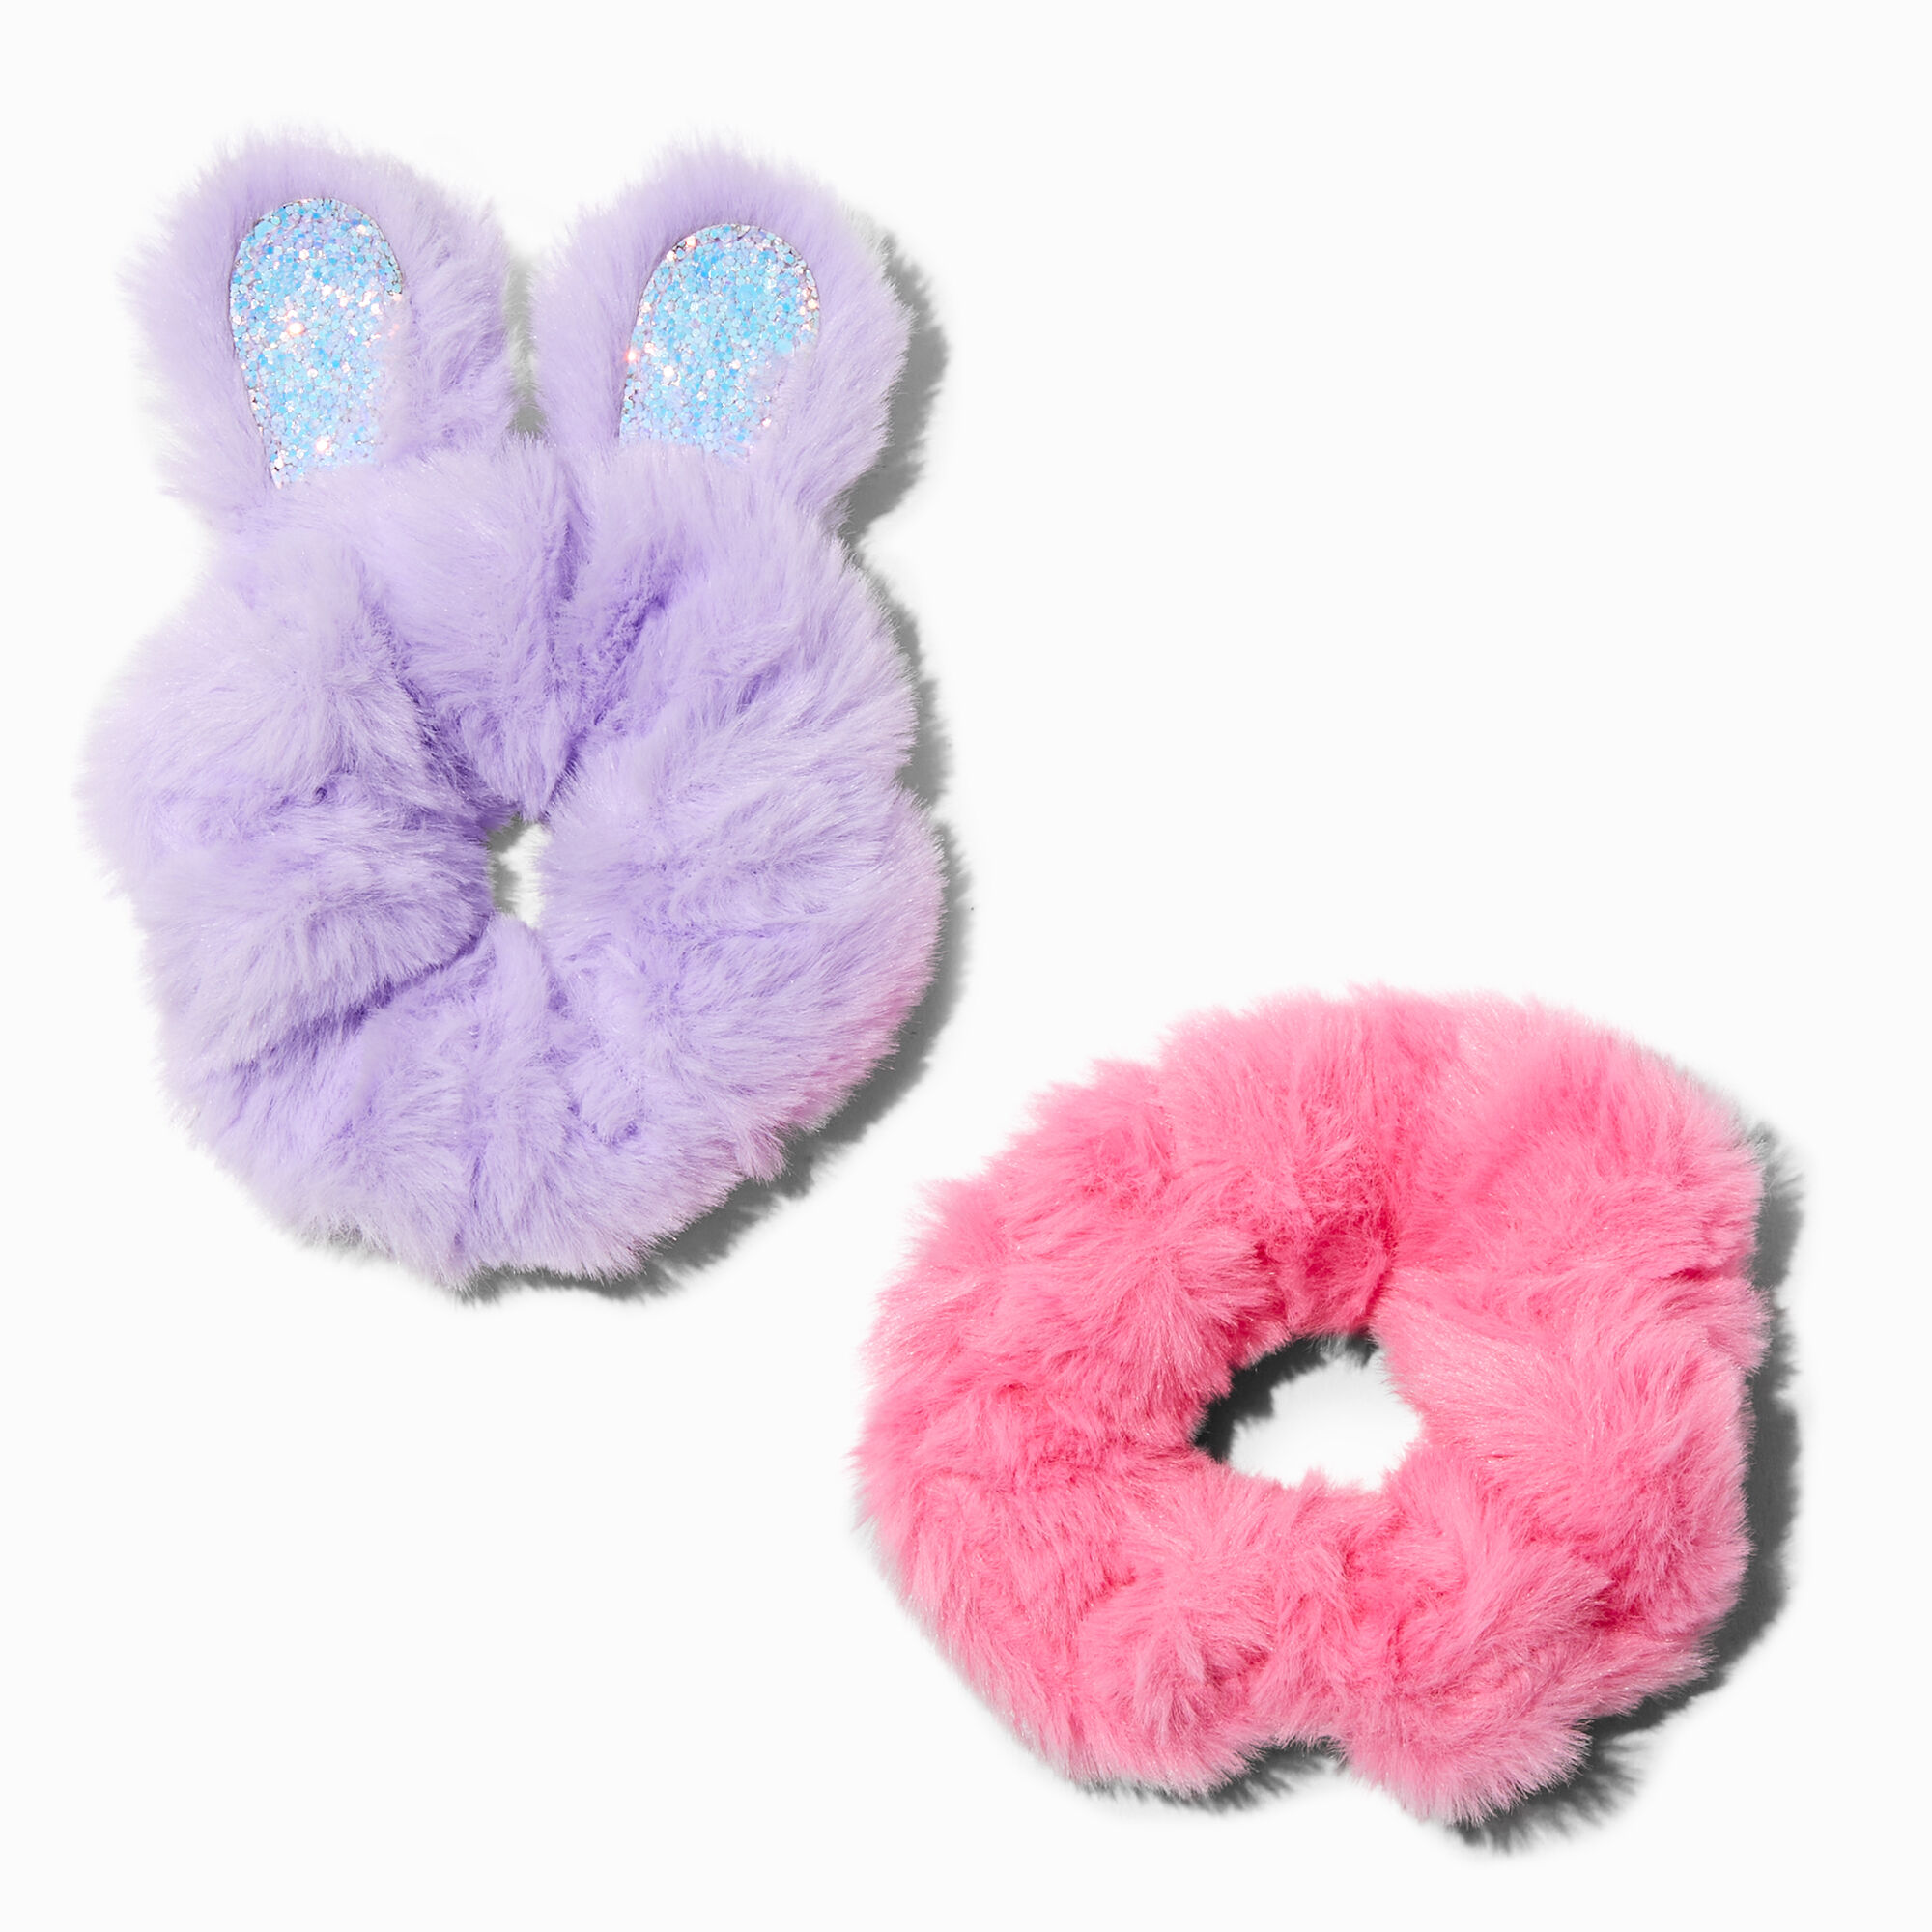 View Claires Club Medium Bunny Hair Scrunchies 2 Pack information